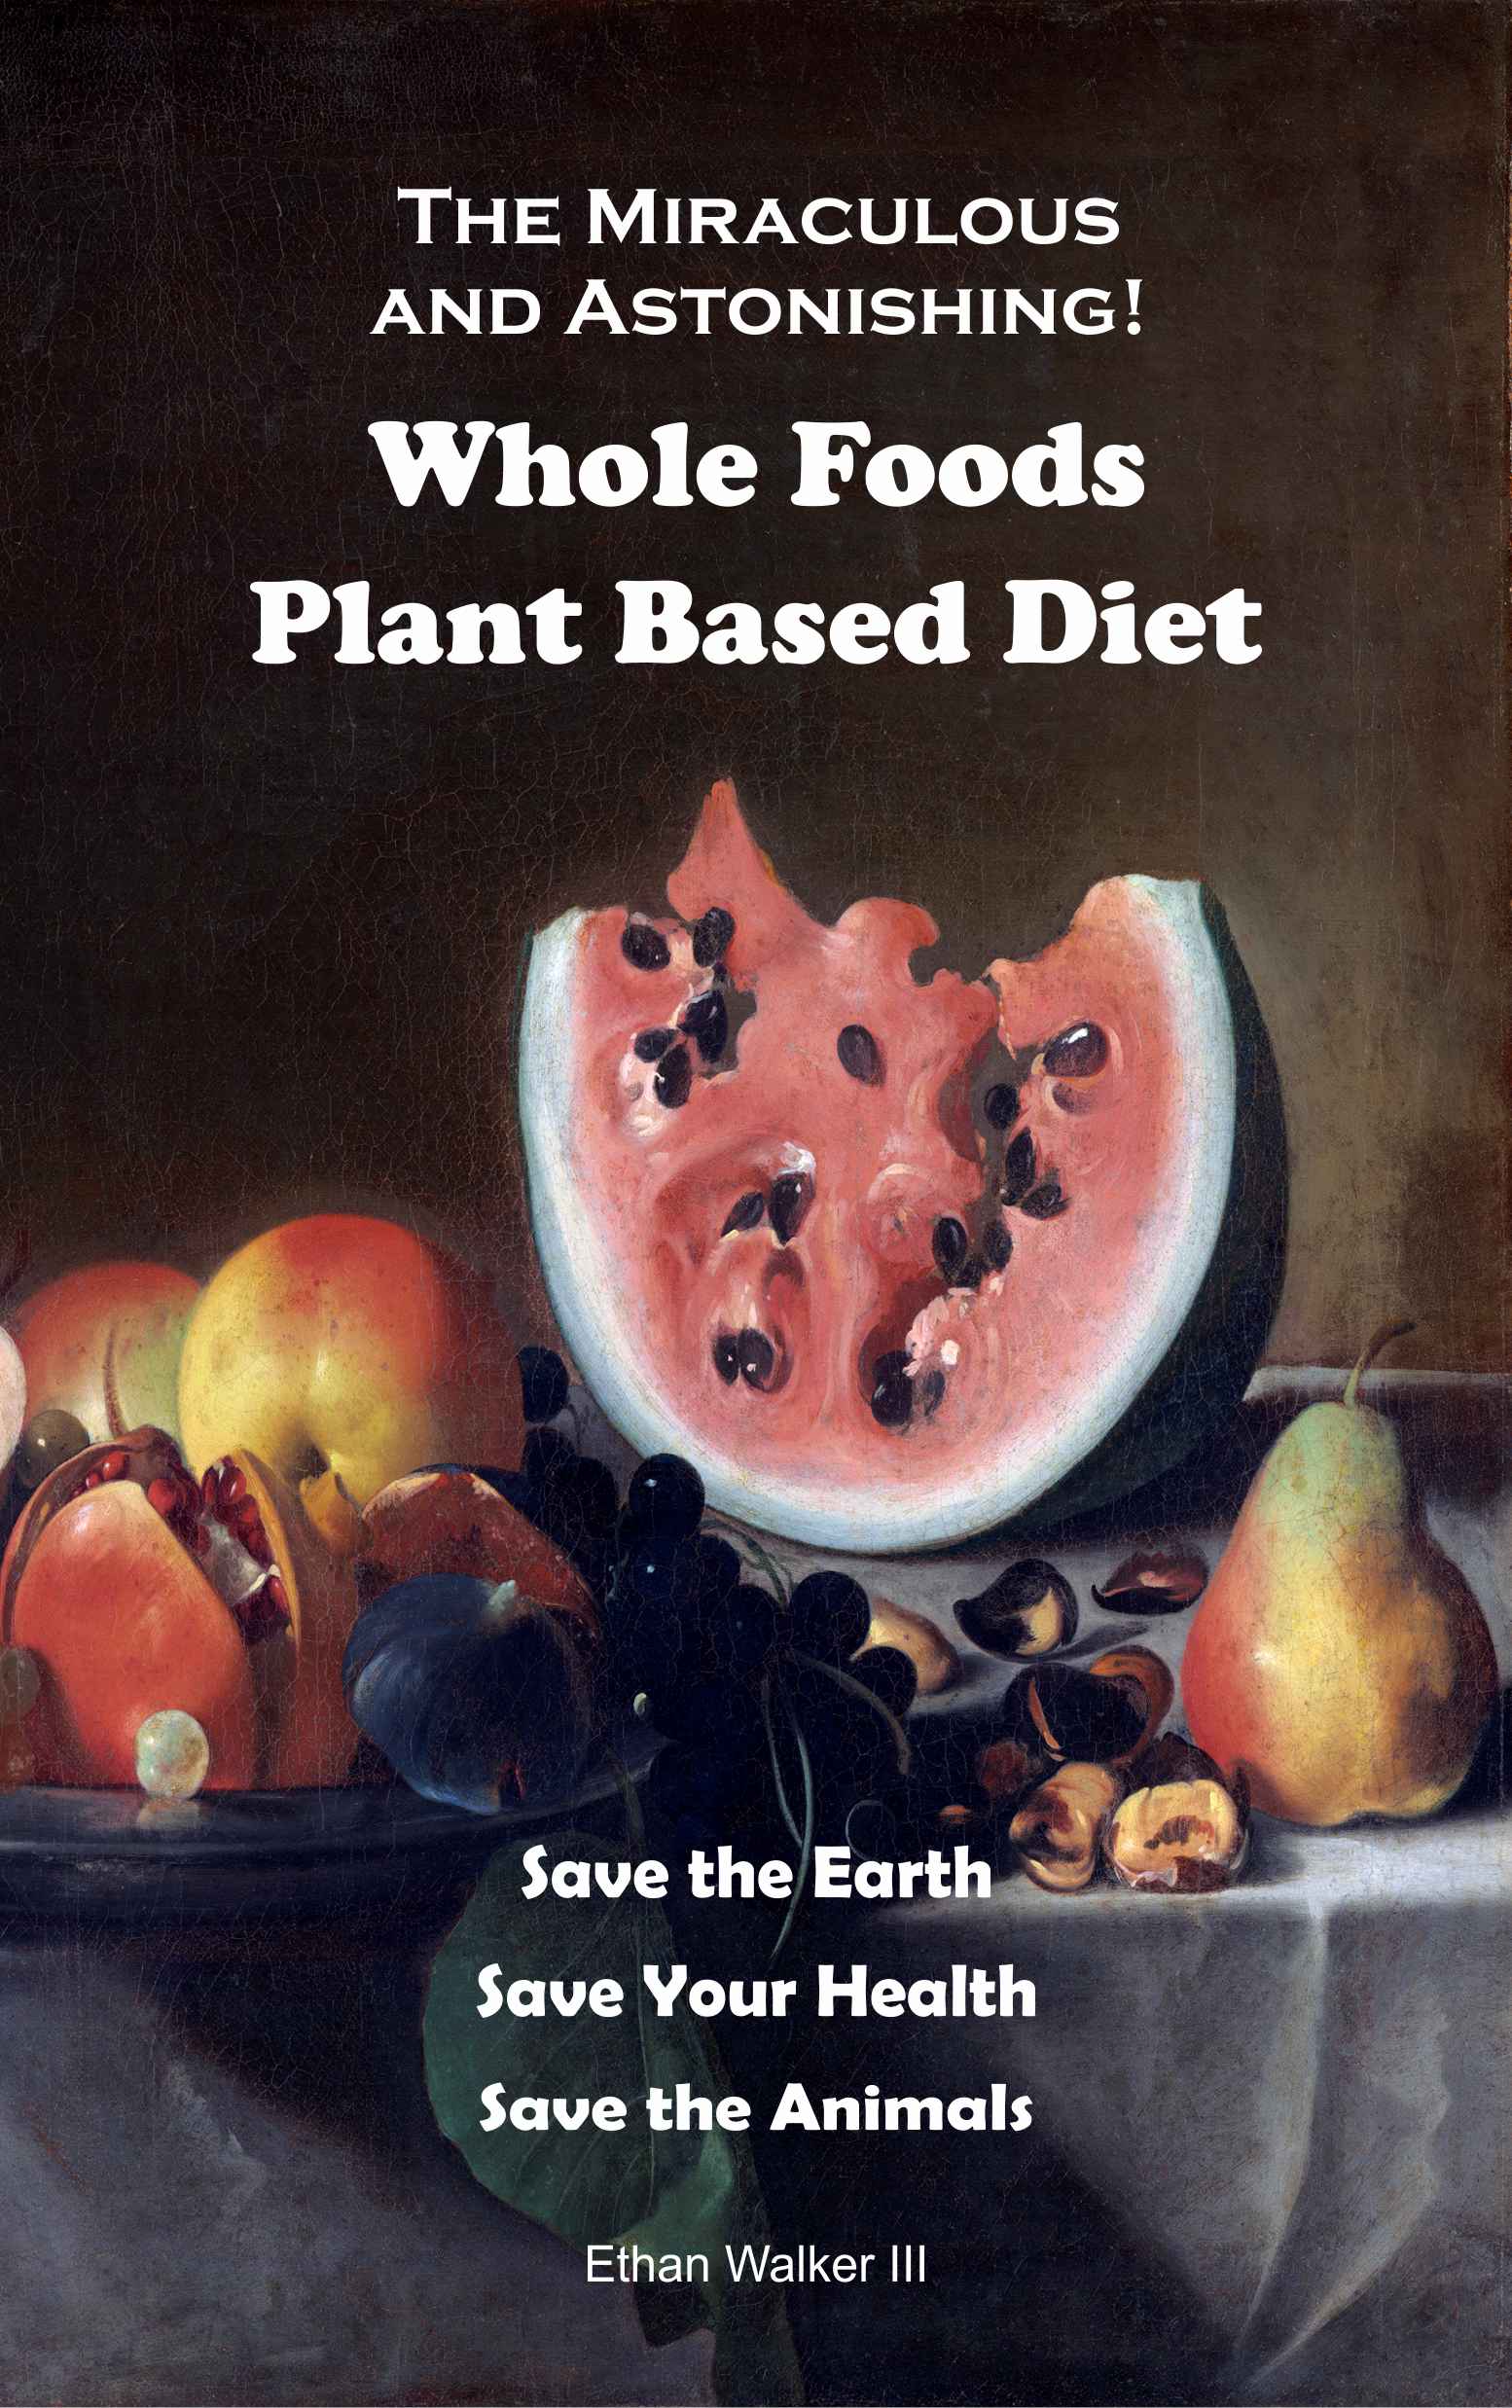 Whole foods plant based diet